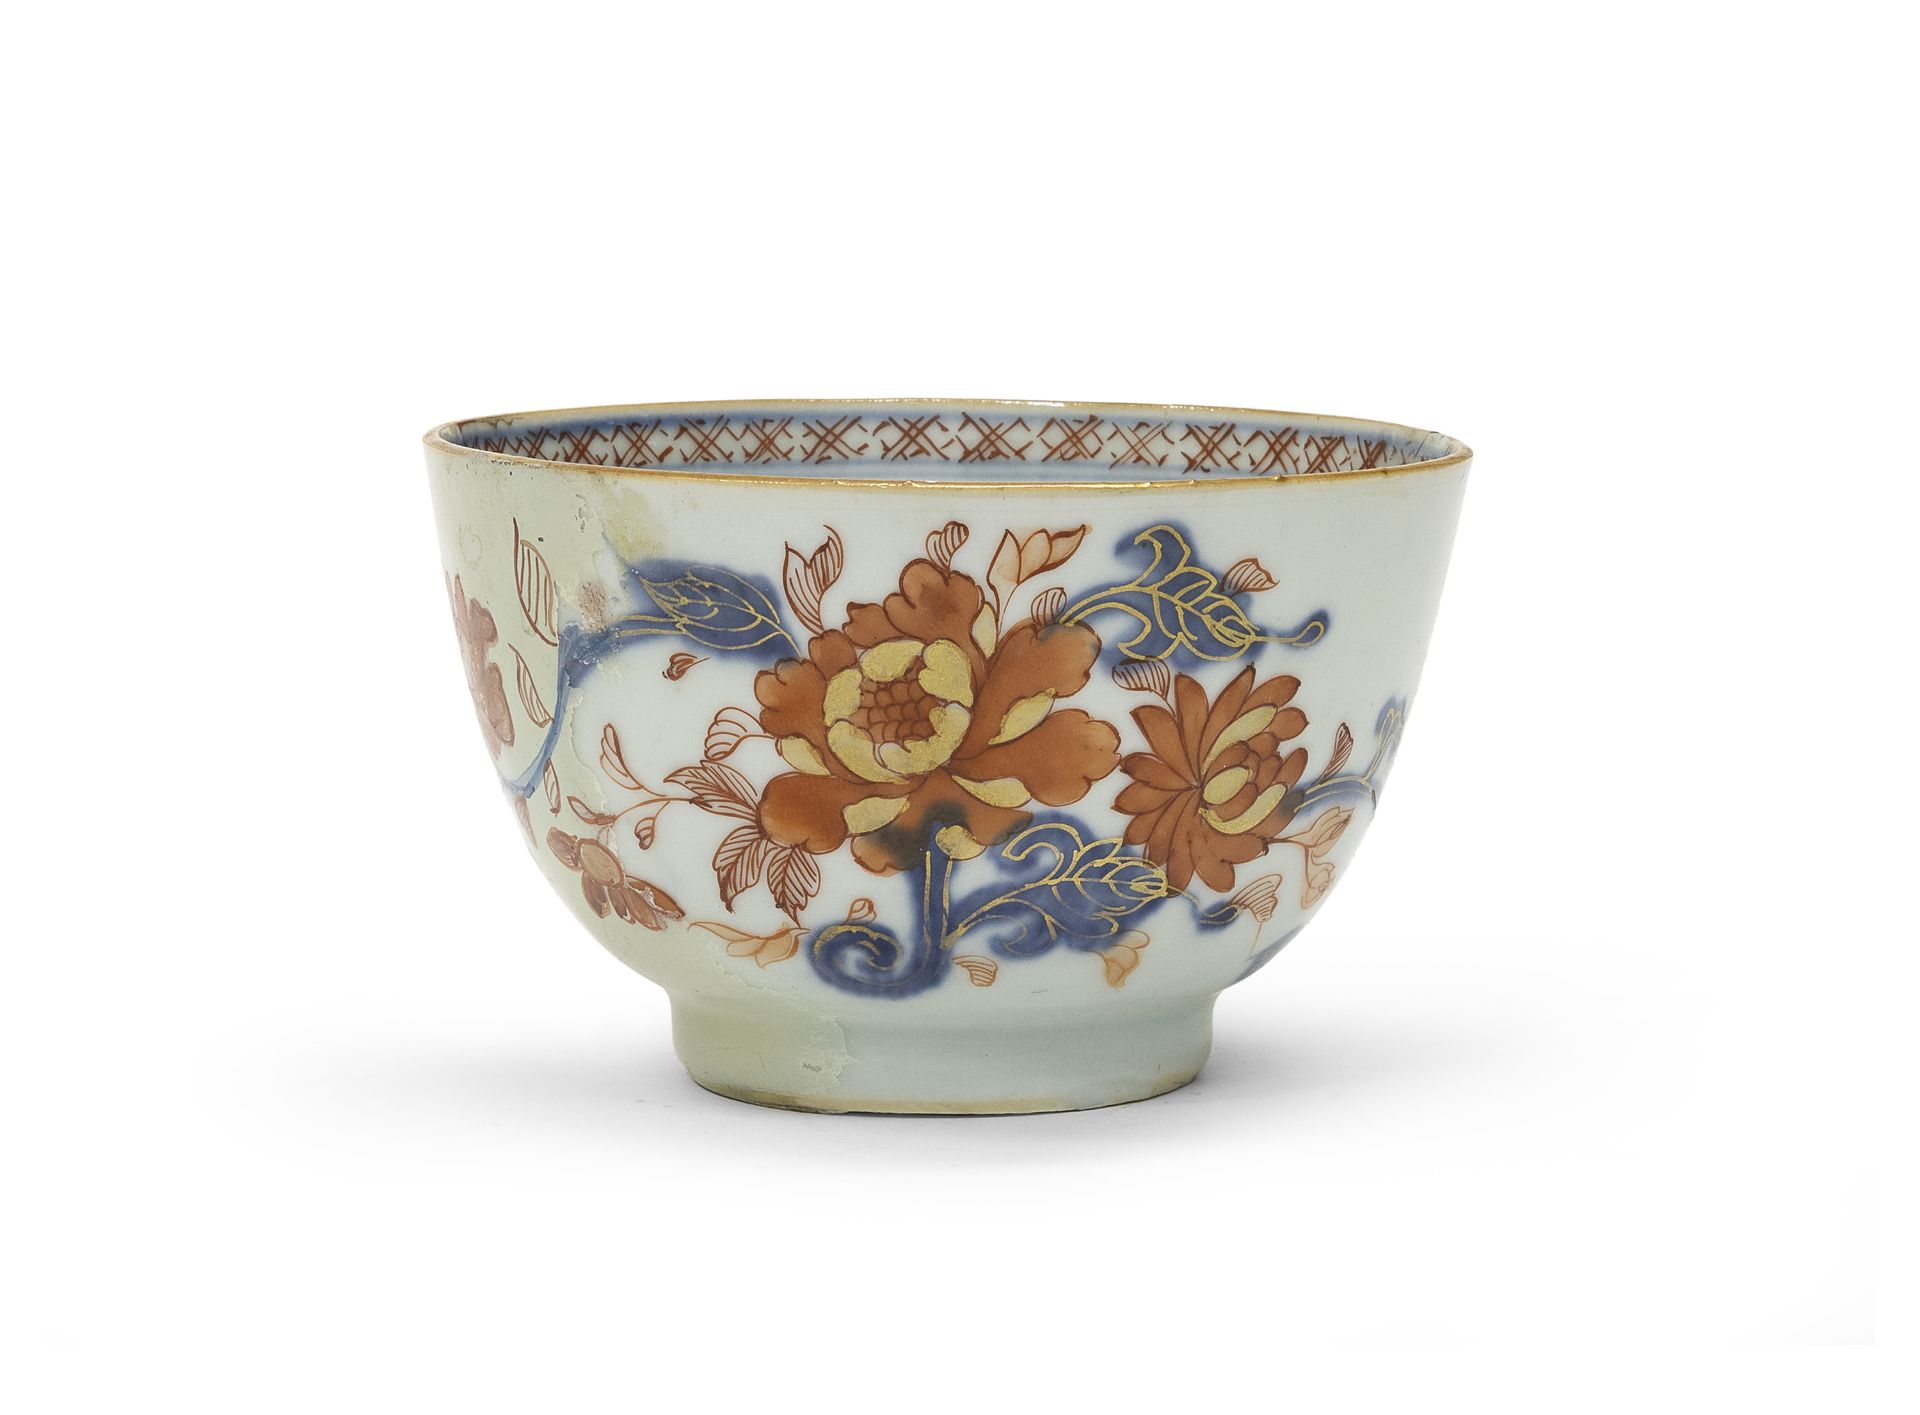 A POLYCHROME ENAMELED PORCELAIN BOWL CHINA 19TH CENTURY. FRACTURE AND RESTAURATION